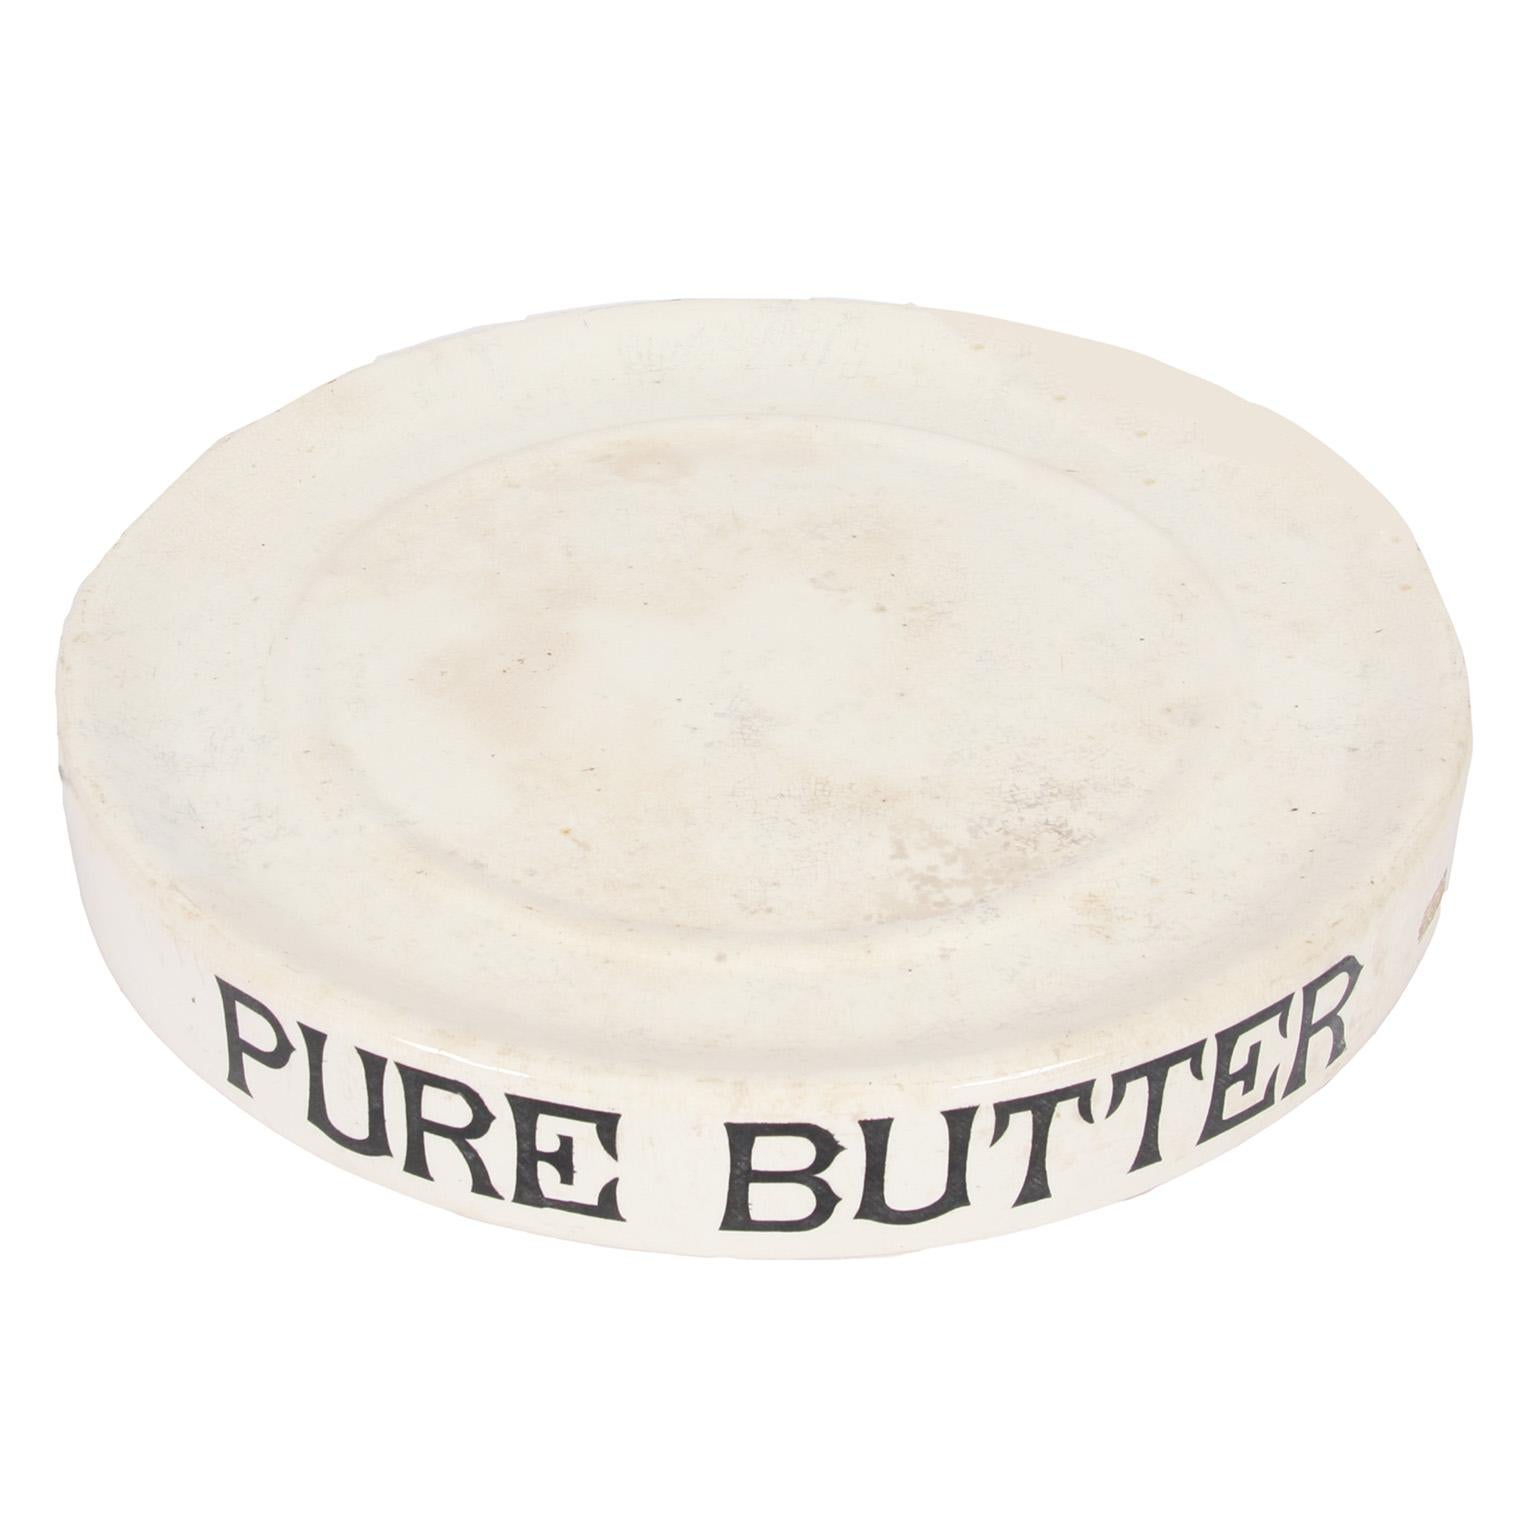 English 19th century

Fine grocer or dairy's white ironstone display dish for PURE BUTTER. 

A beautifully decorative piece. In good condition. A rare piece. 

A pure butter dairy slab originally used for displaying butter on dairy shop